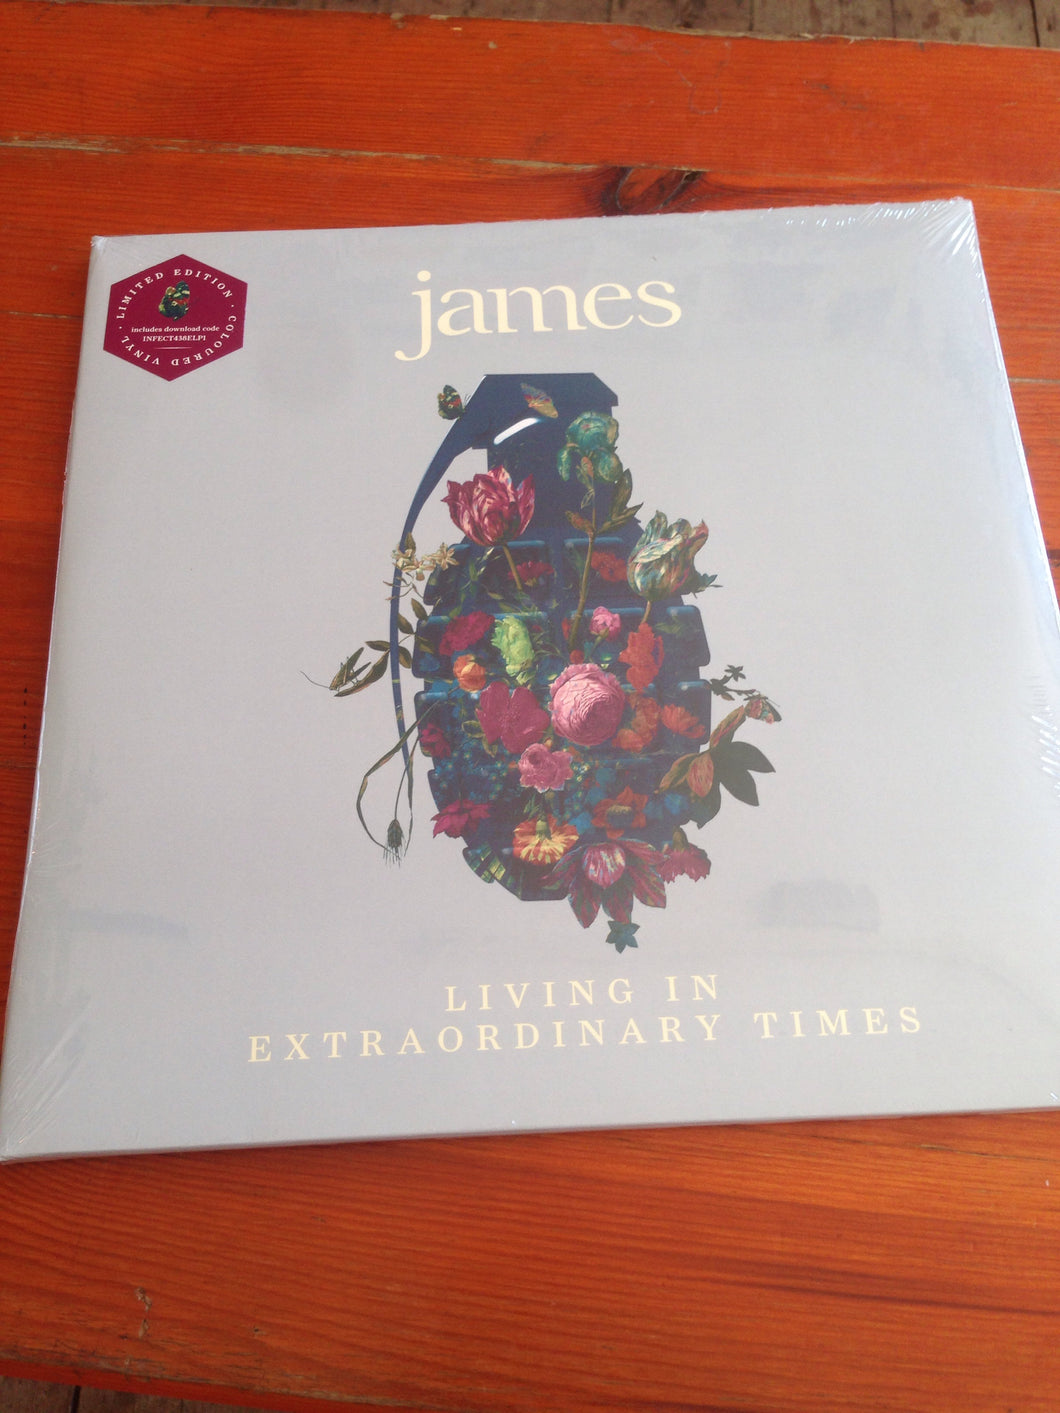 James - Living in Extraordinary Times